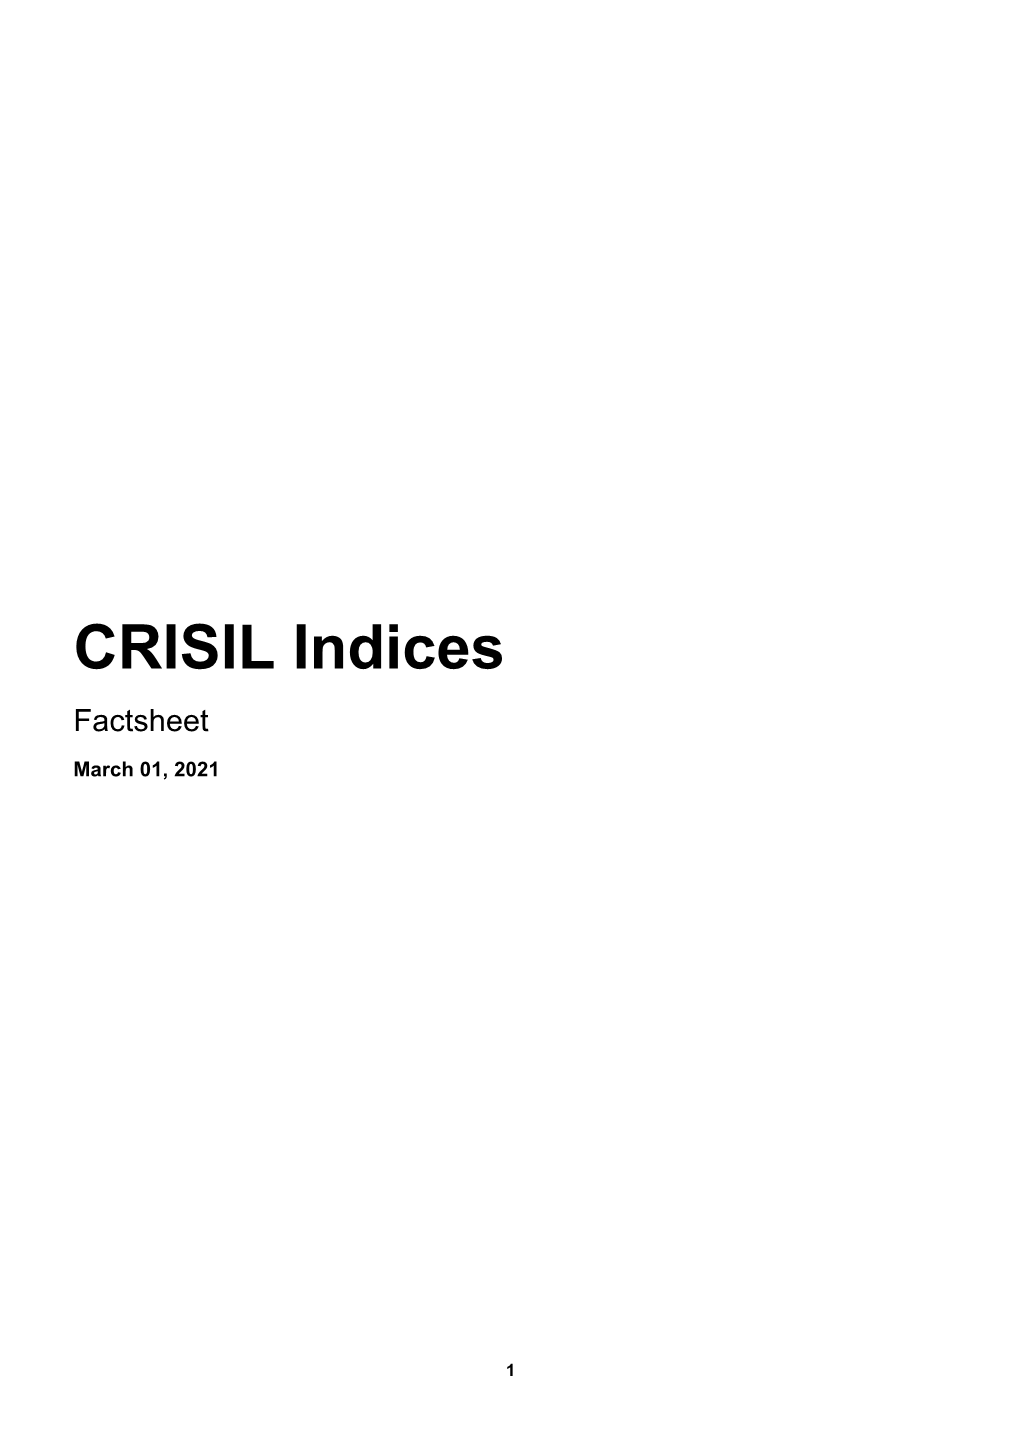 CRISIL Indices Factsheet March 01 2021